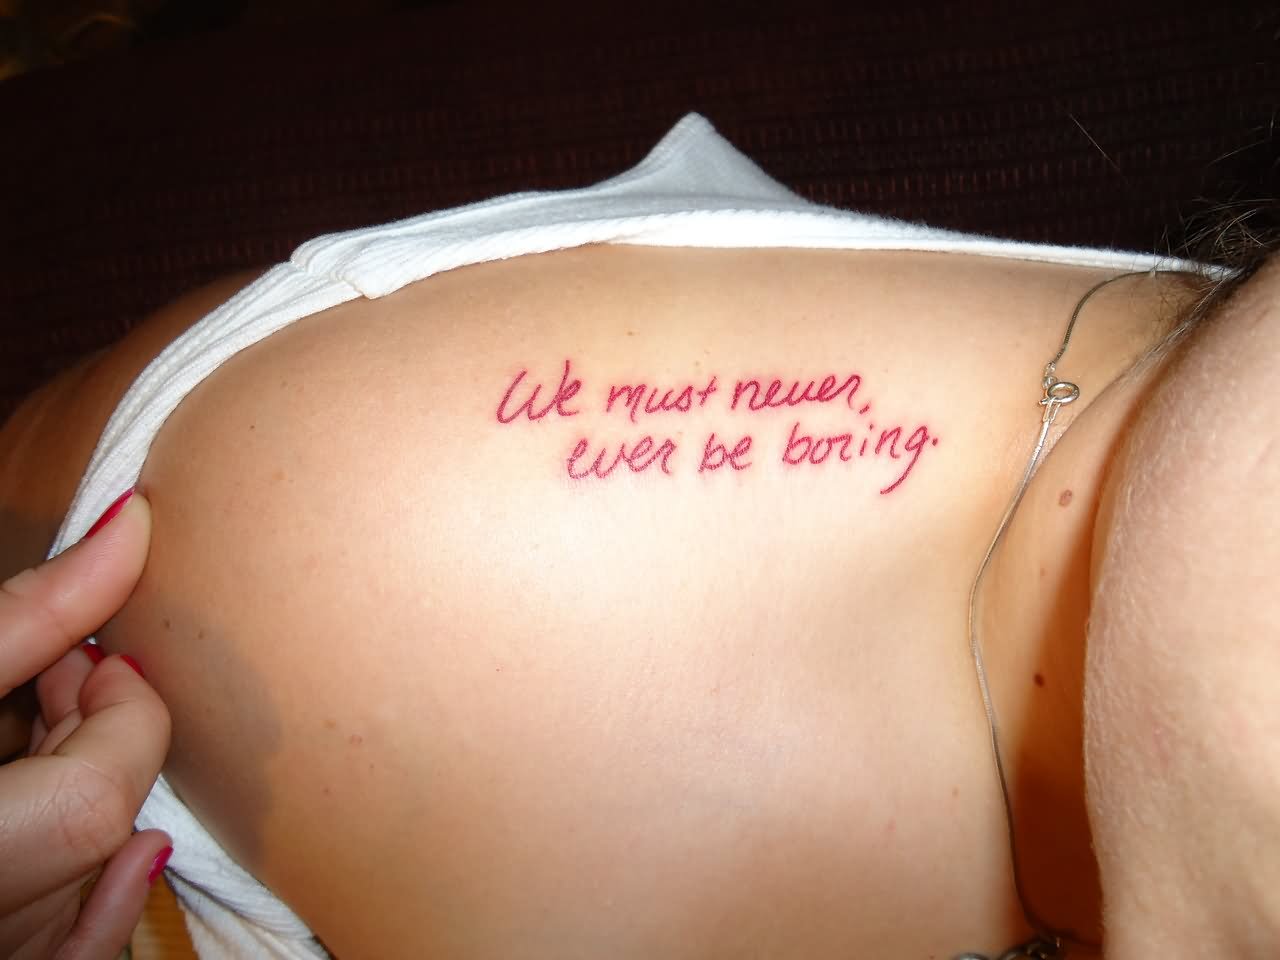 We Must Never Ever Be Boring Literary Tattoo On Girl Upper Shoulder